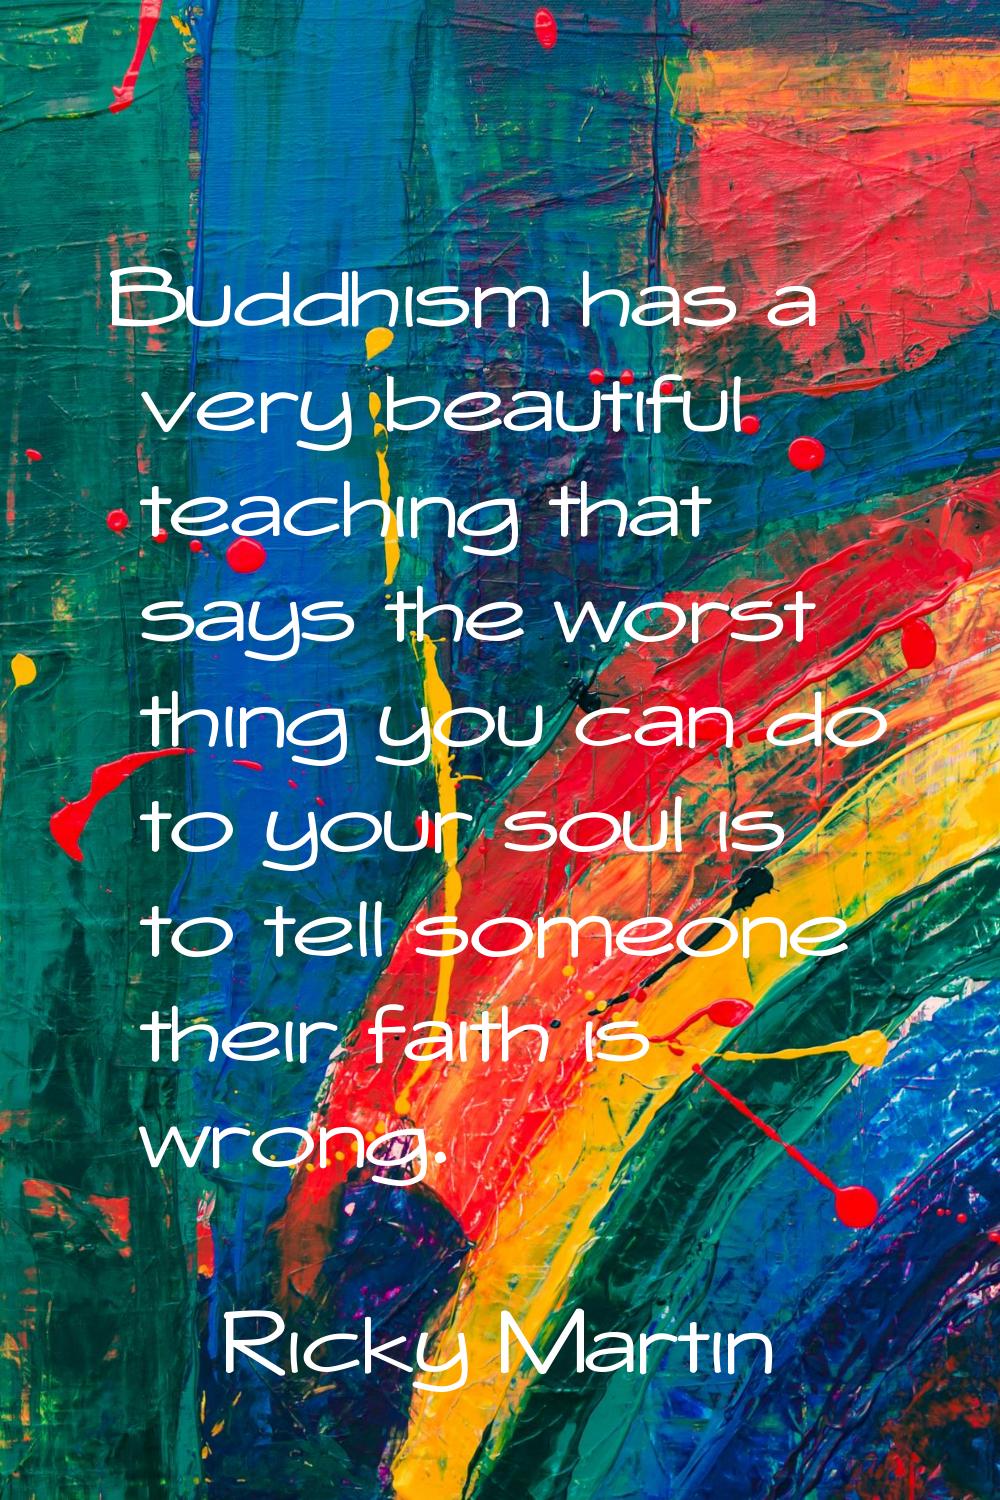 Buddhism has a very beautiful teaching that says the worst thing you can do to your soul is to tell